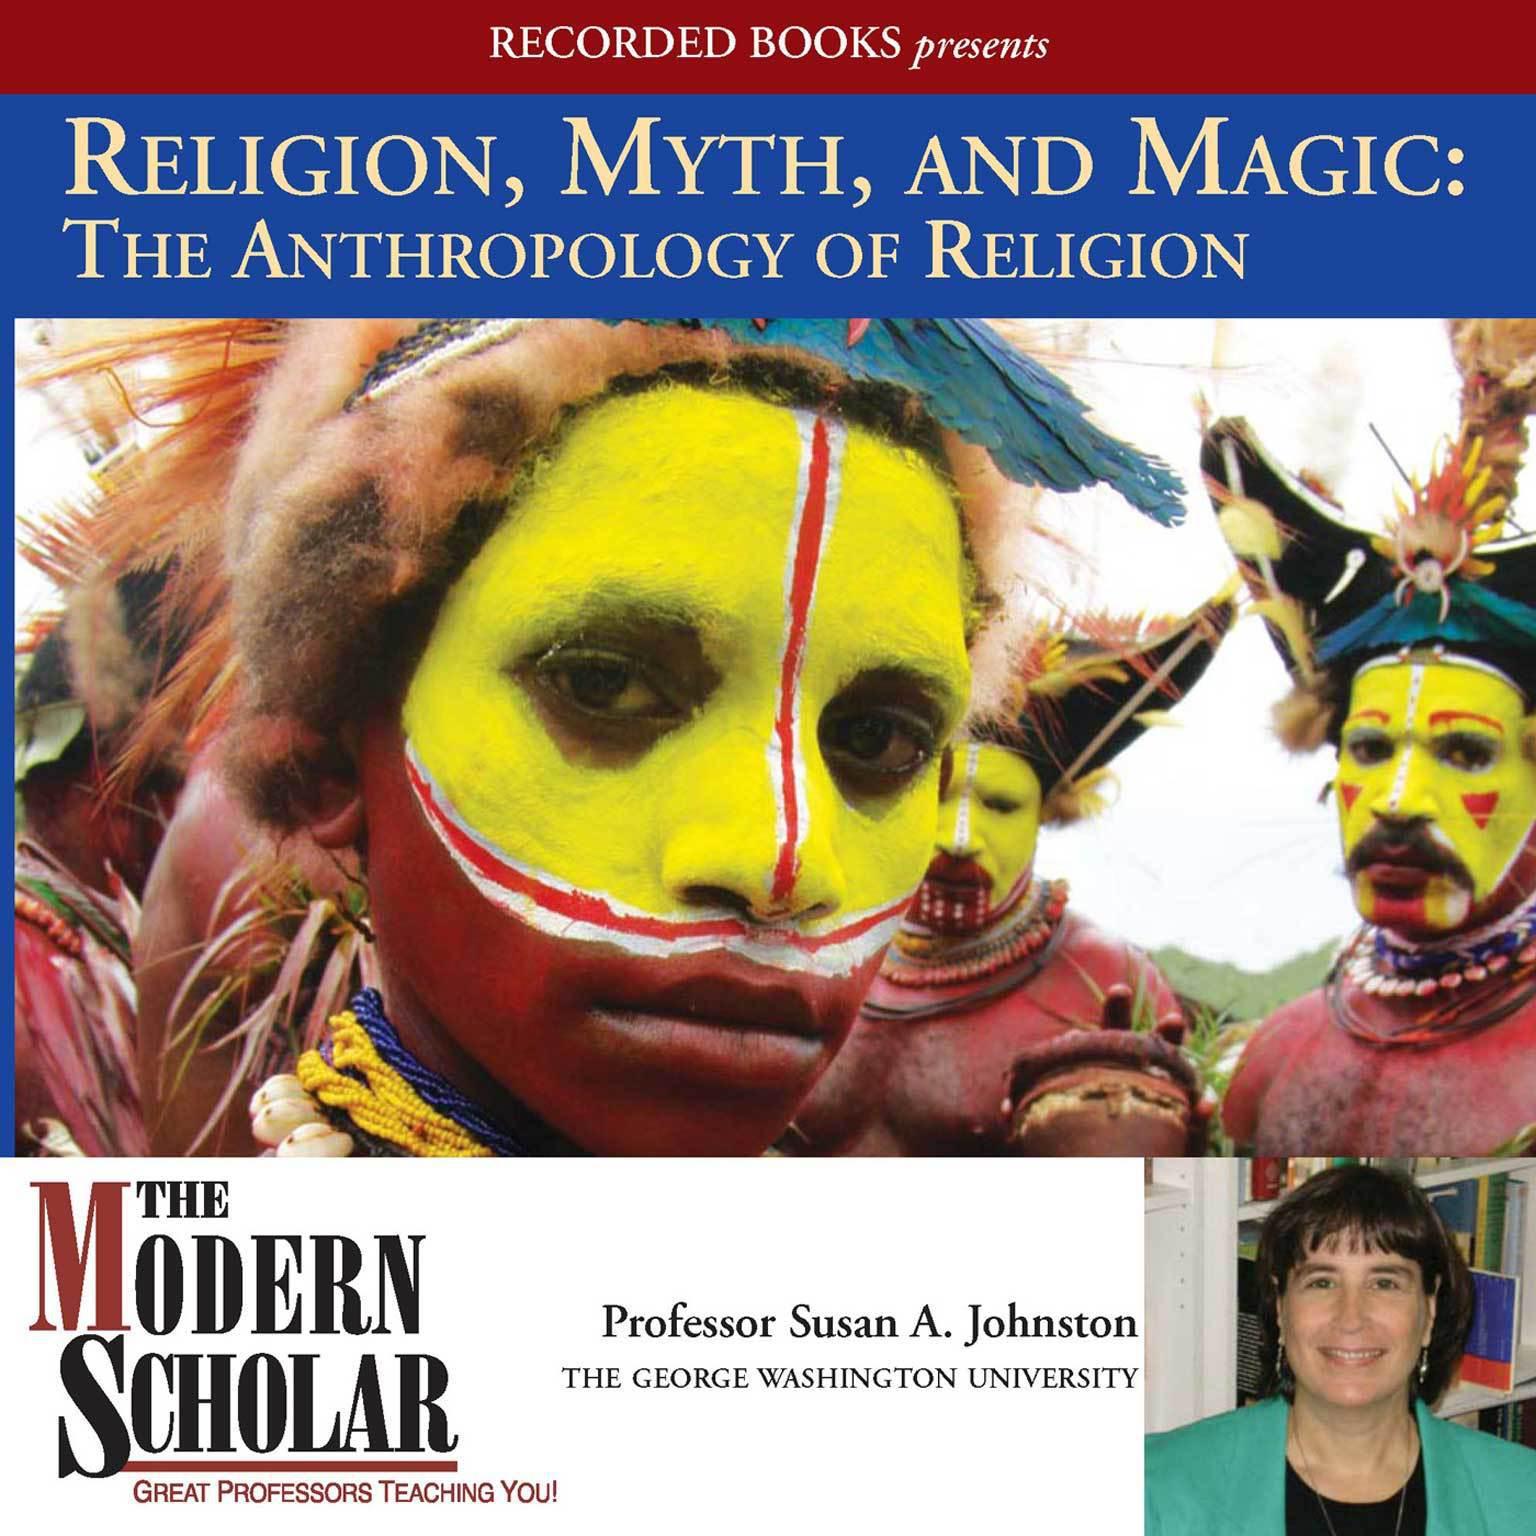 Religion, Myth, and Magic: The Anthropology of Religion Audiobook, by Susan A. Johnston